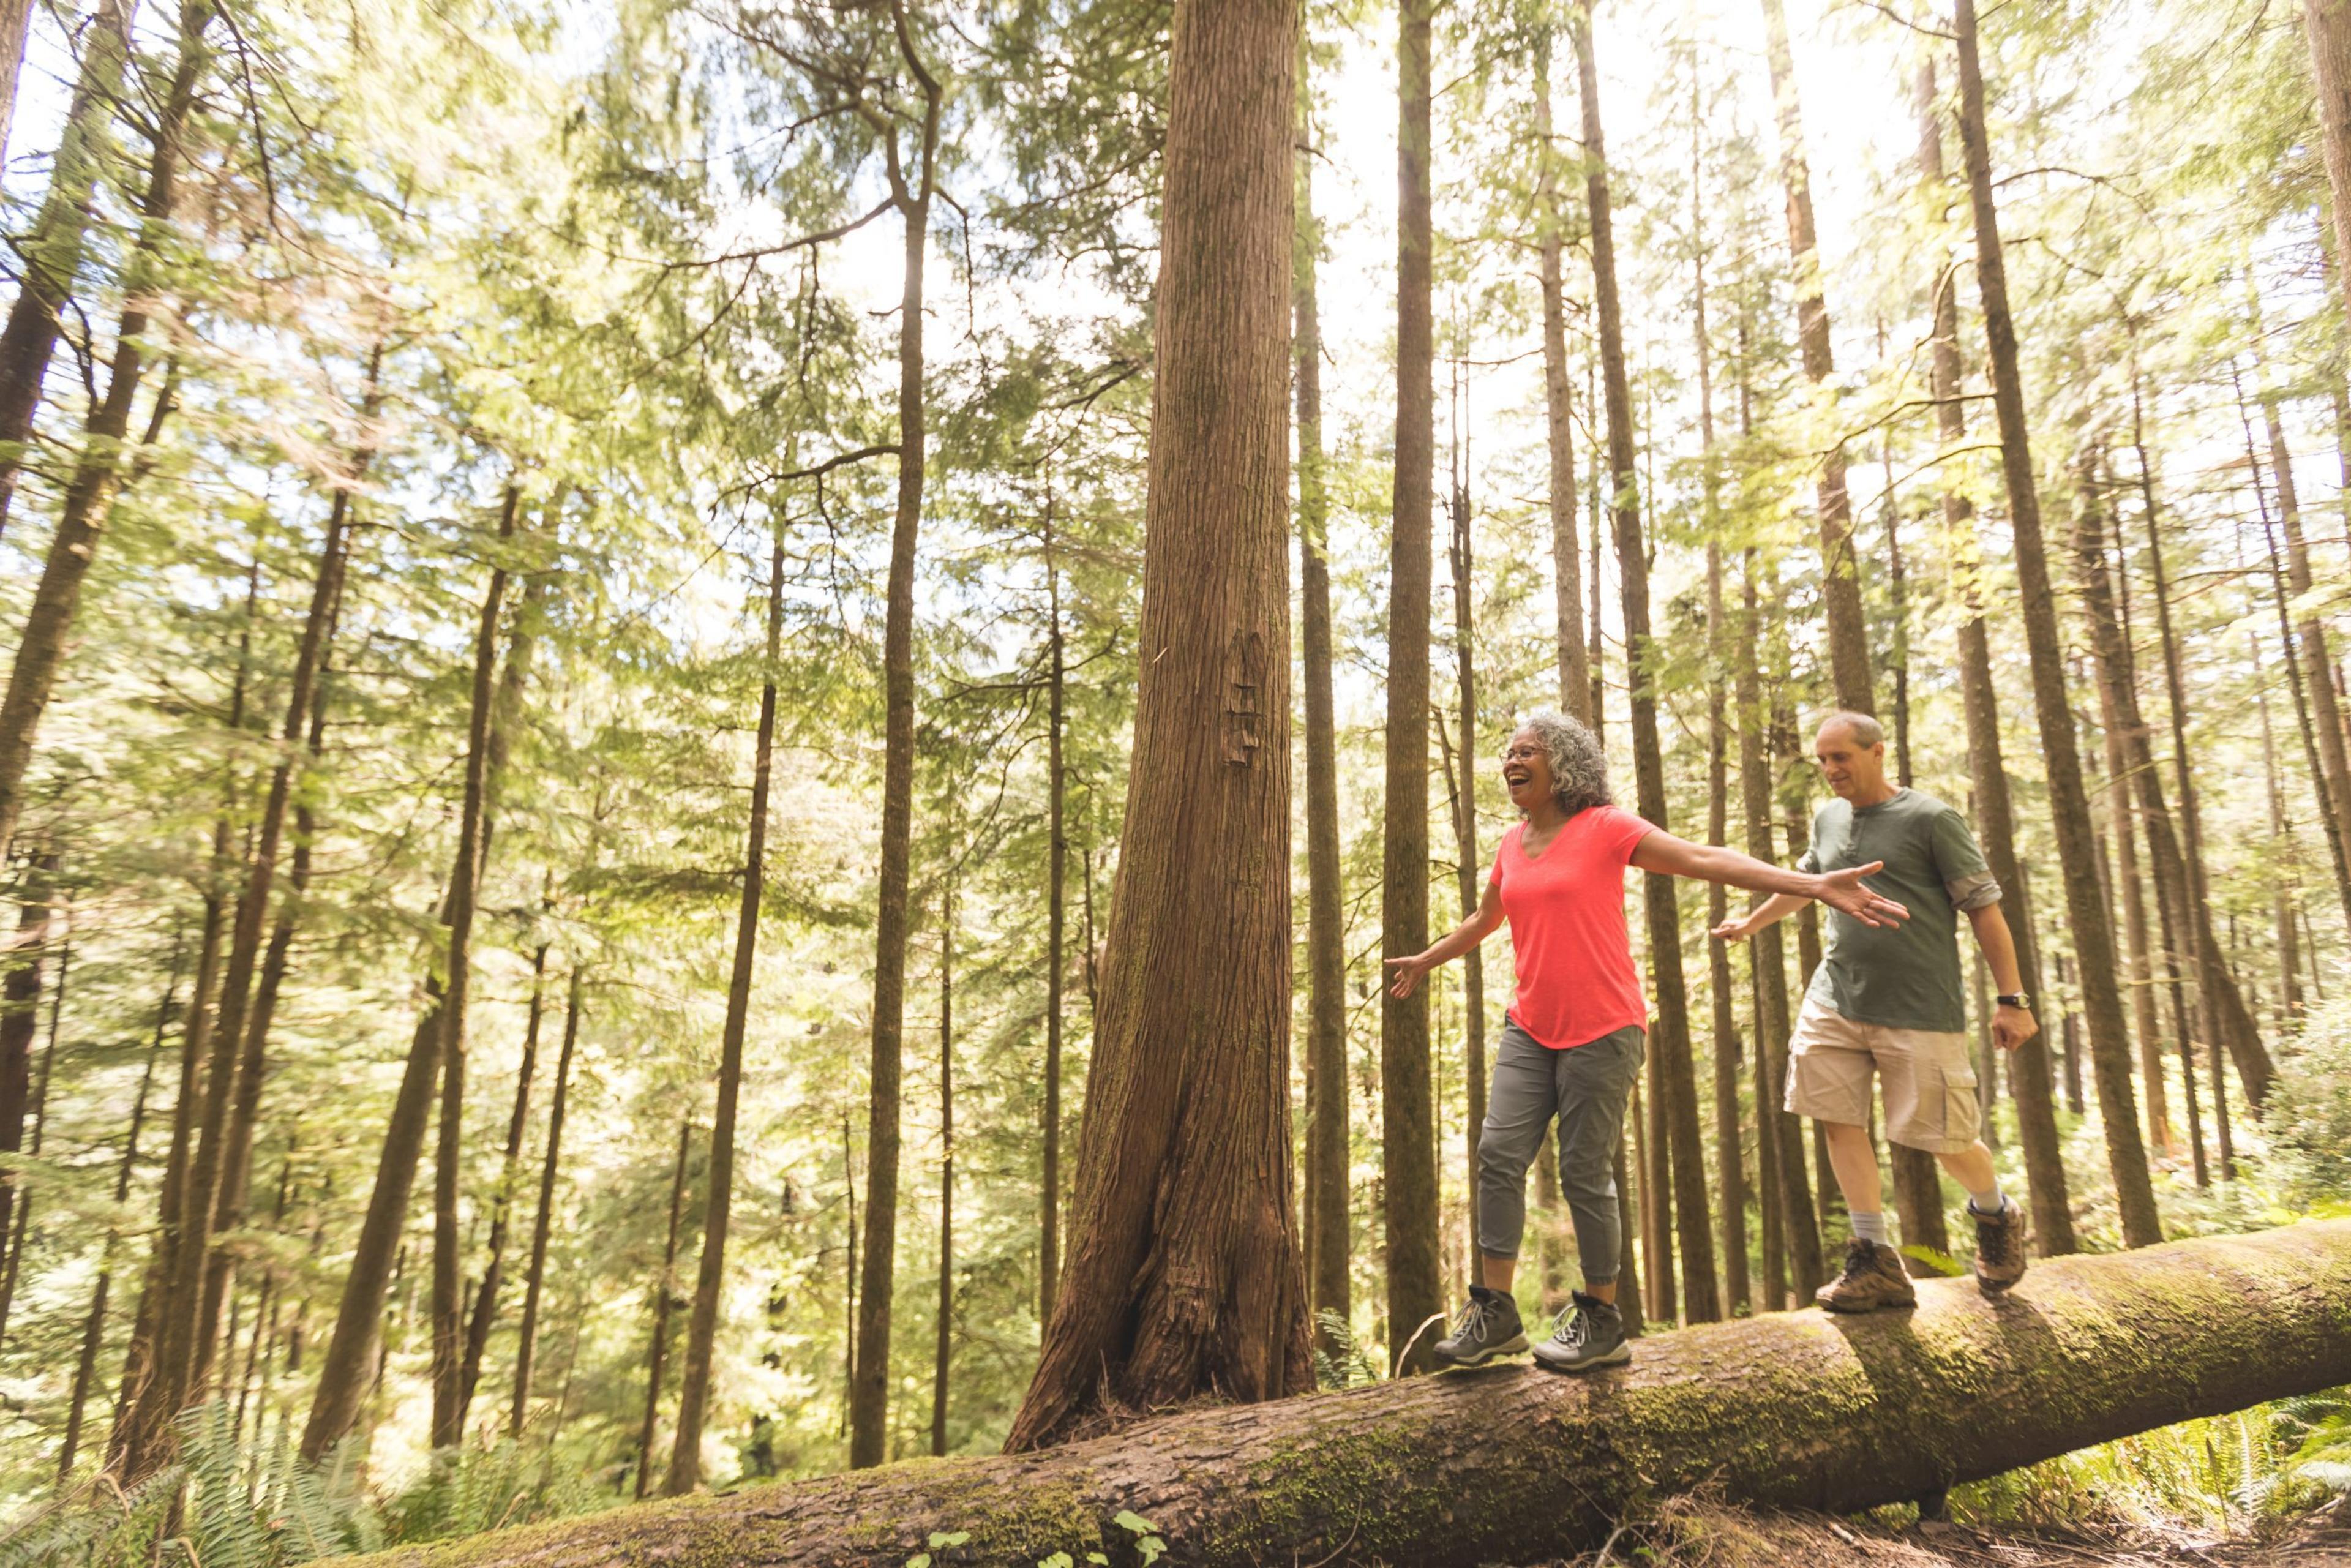 Cute senior couple explore the Pacific Northwest together on a day hiking trip. They are walking across a log in the forest. She is in front and they have their arms out for balance as they inch across...